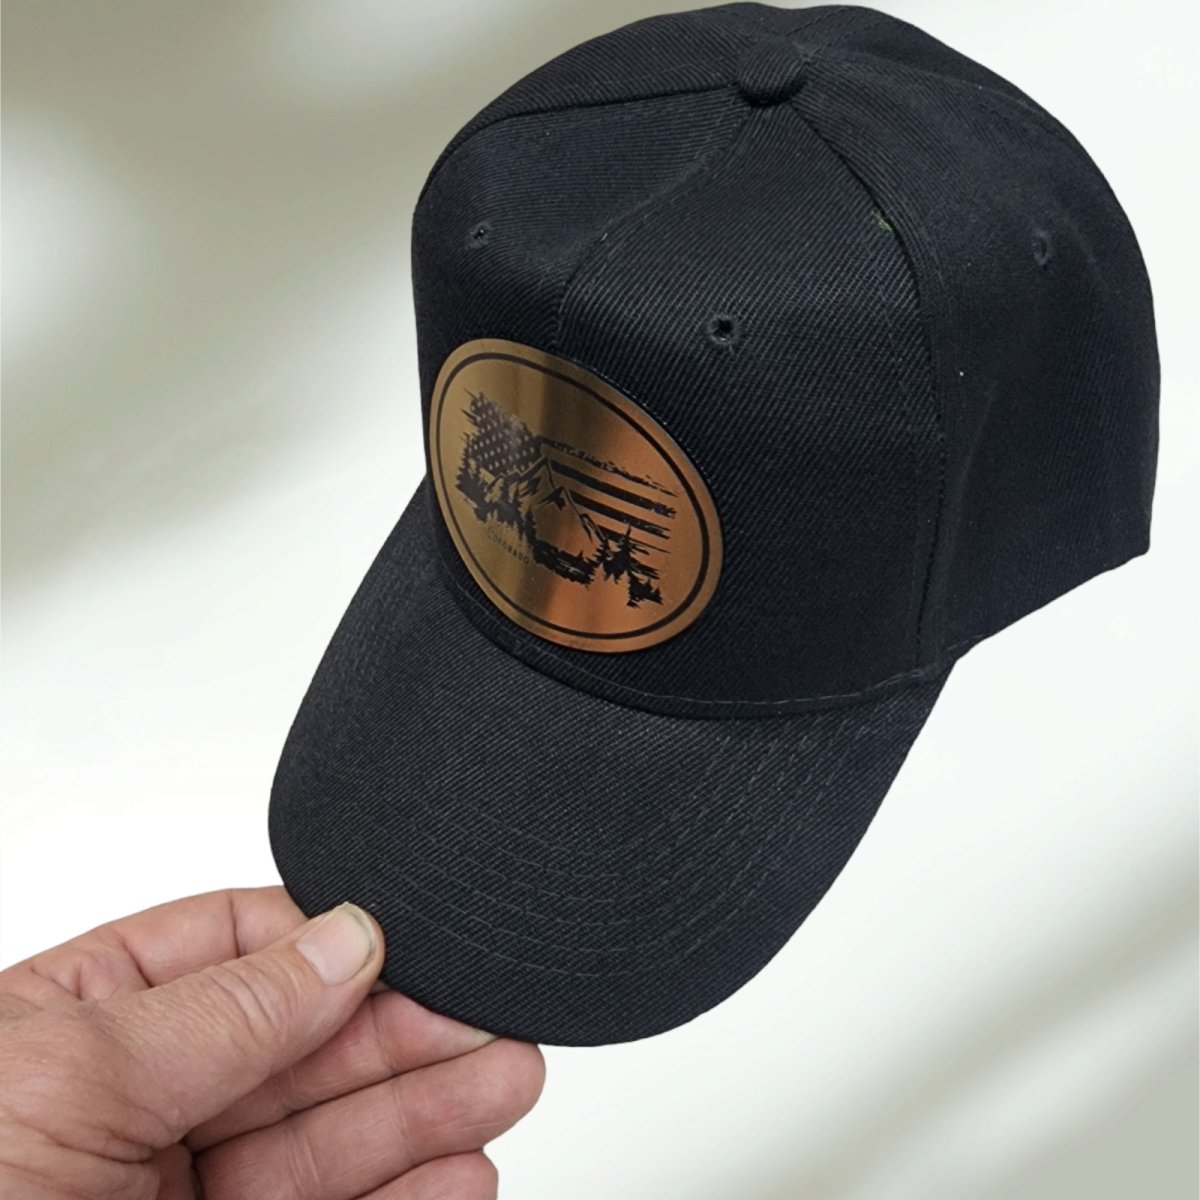 Leather Patches Emblems for Hats Jackets Clothing and more - Hats Signs Patches 3D printing Engraving